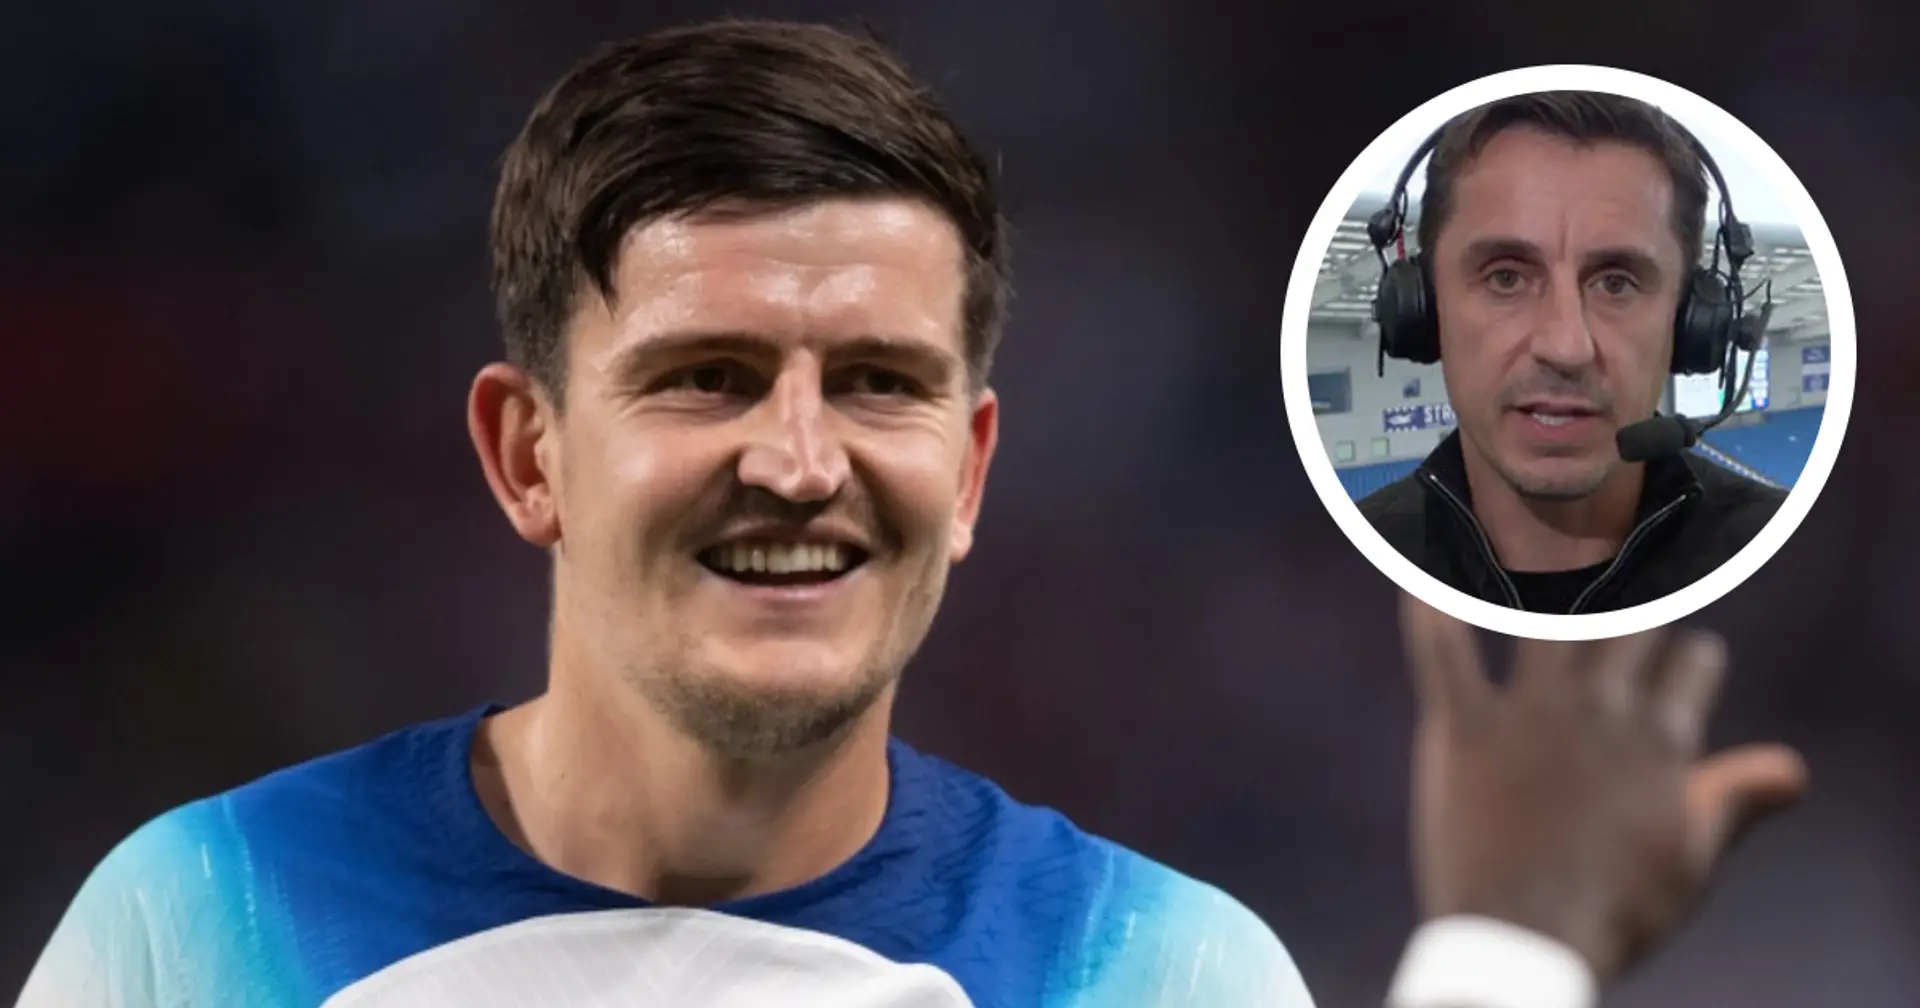 'Man United is a very unforgiving place': Gary Neville on why Maguire plays better for England